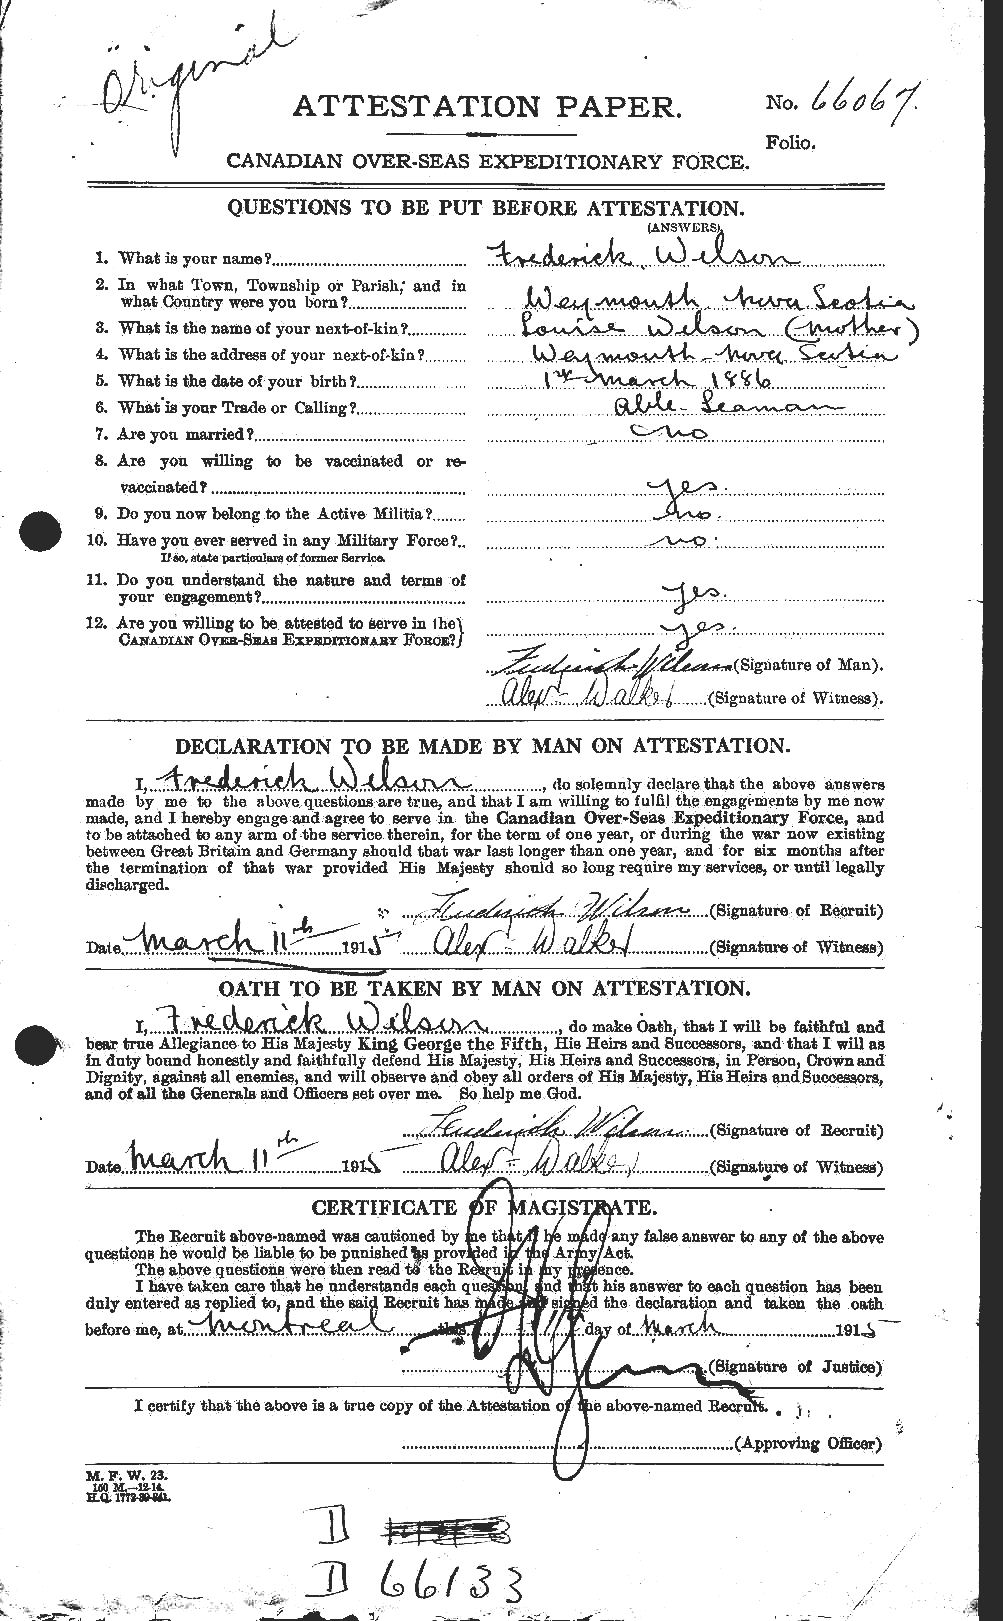 Personnel Records of the First World War - CEF 677581a